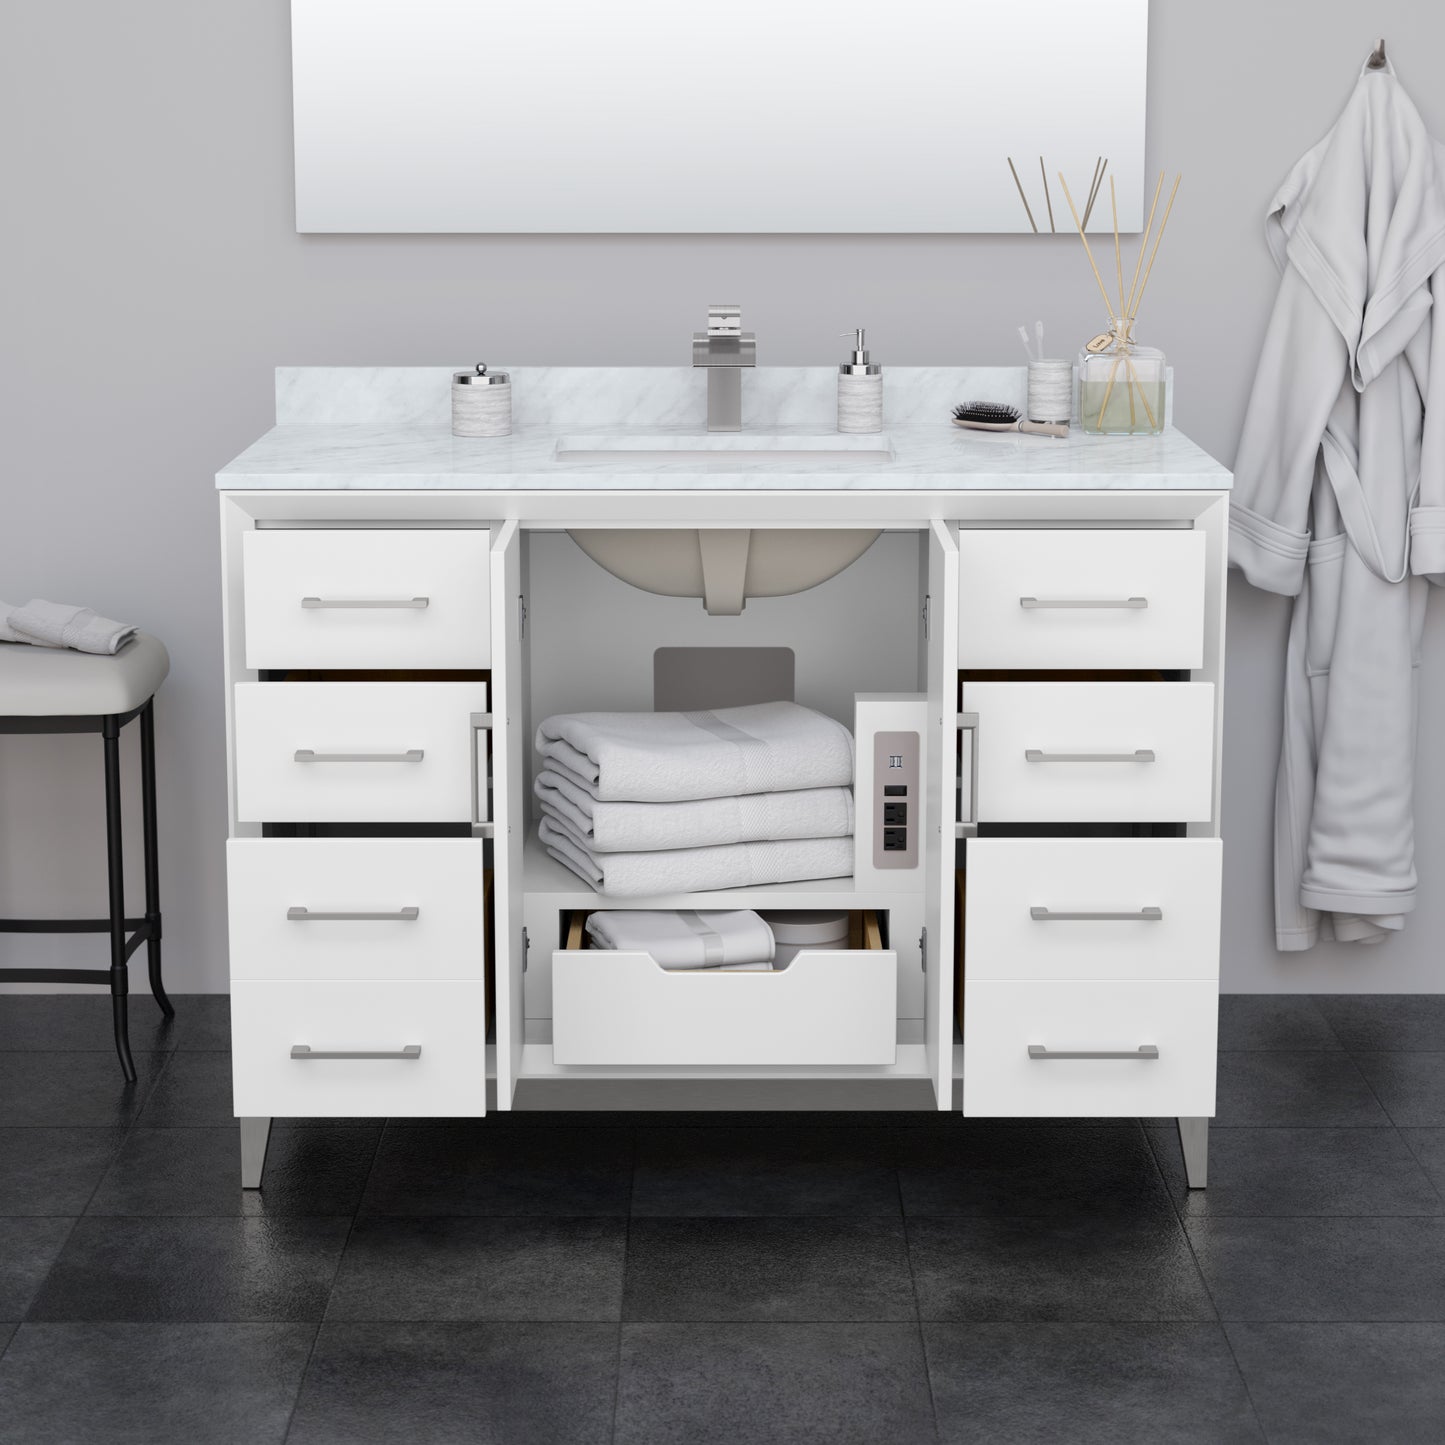 Wyndham Collection Amici 48 Inch Single Bathroom Vanity in White, White Carrara Marble Countertop, Undermount Square Sink - Luxe Bathroom Vanities